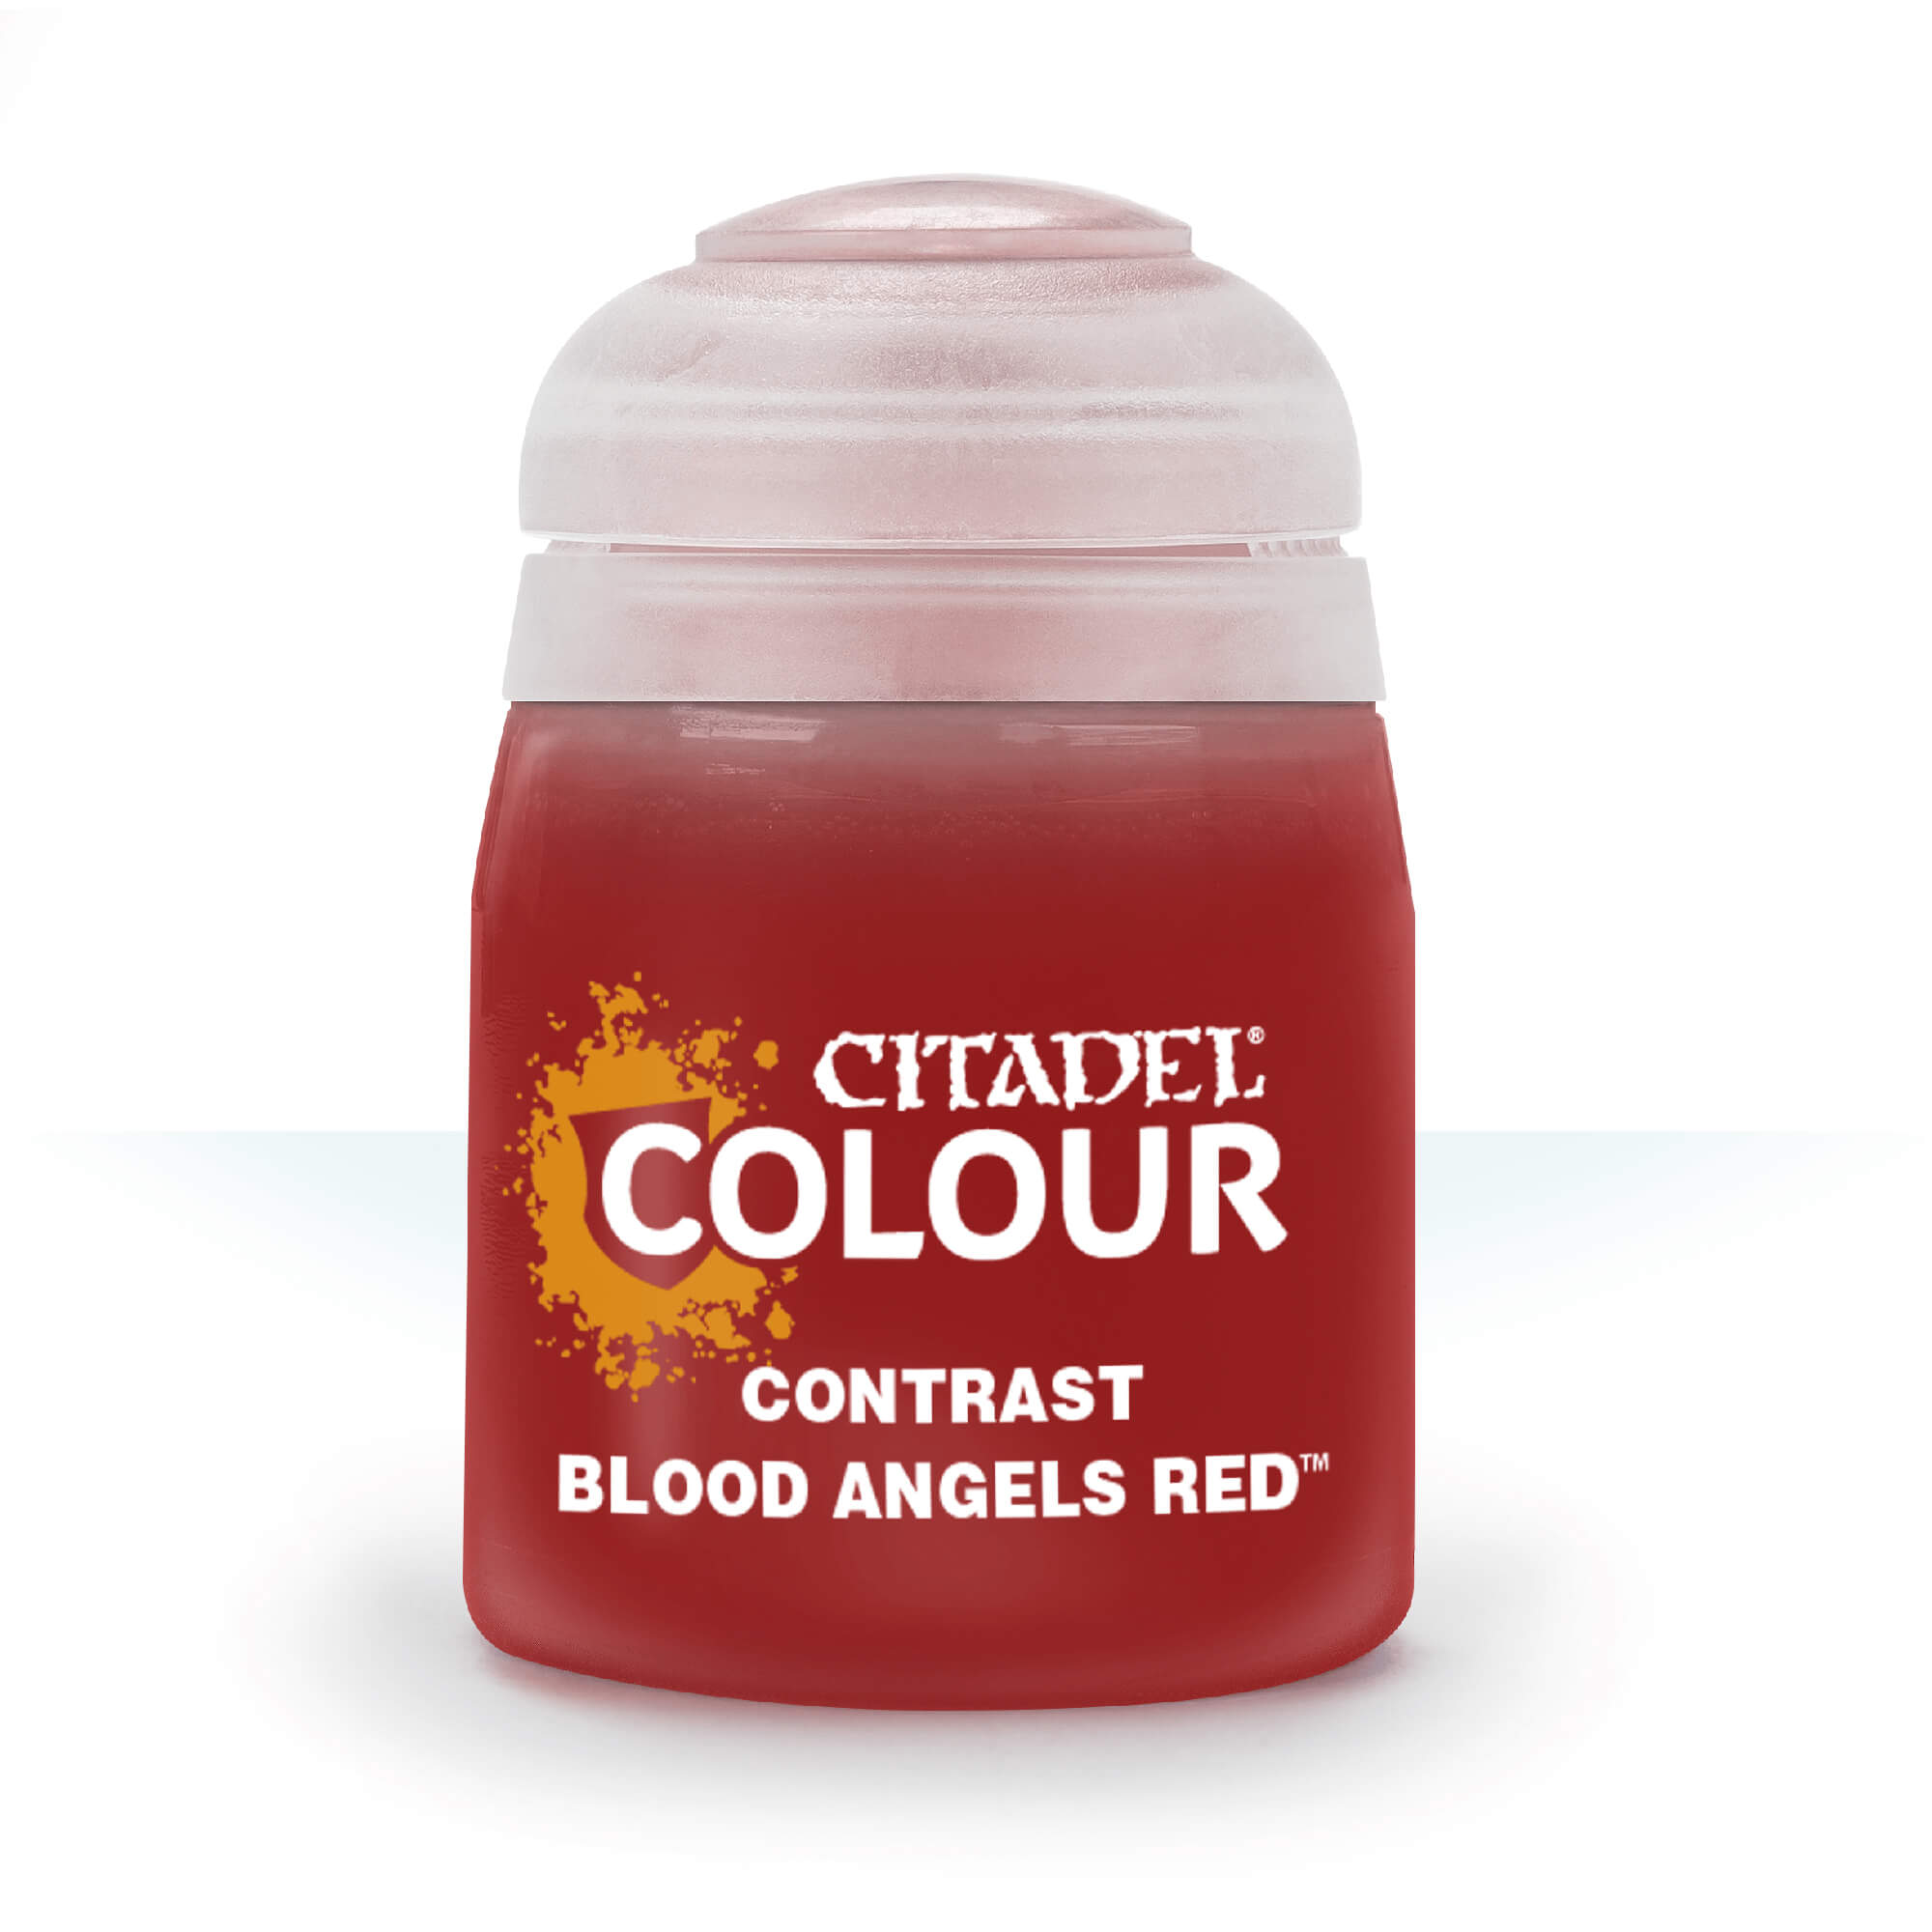 Citadel Blood Angels Red Contrast Paint (18ml)